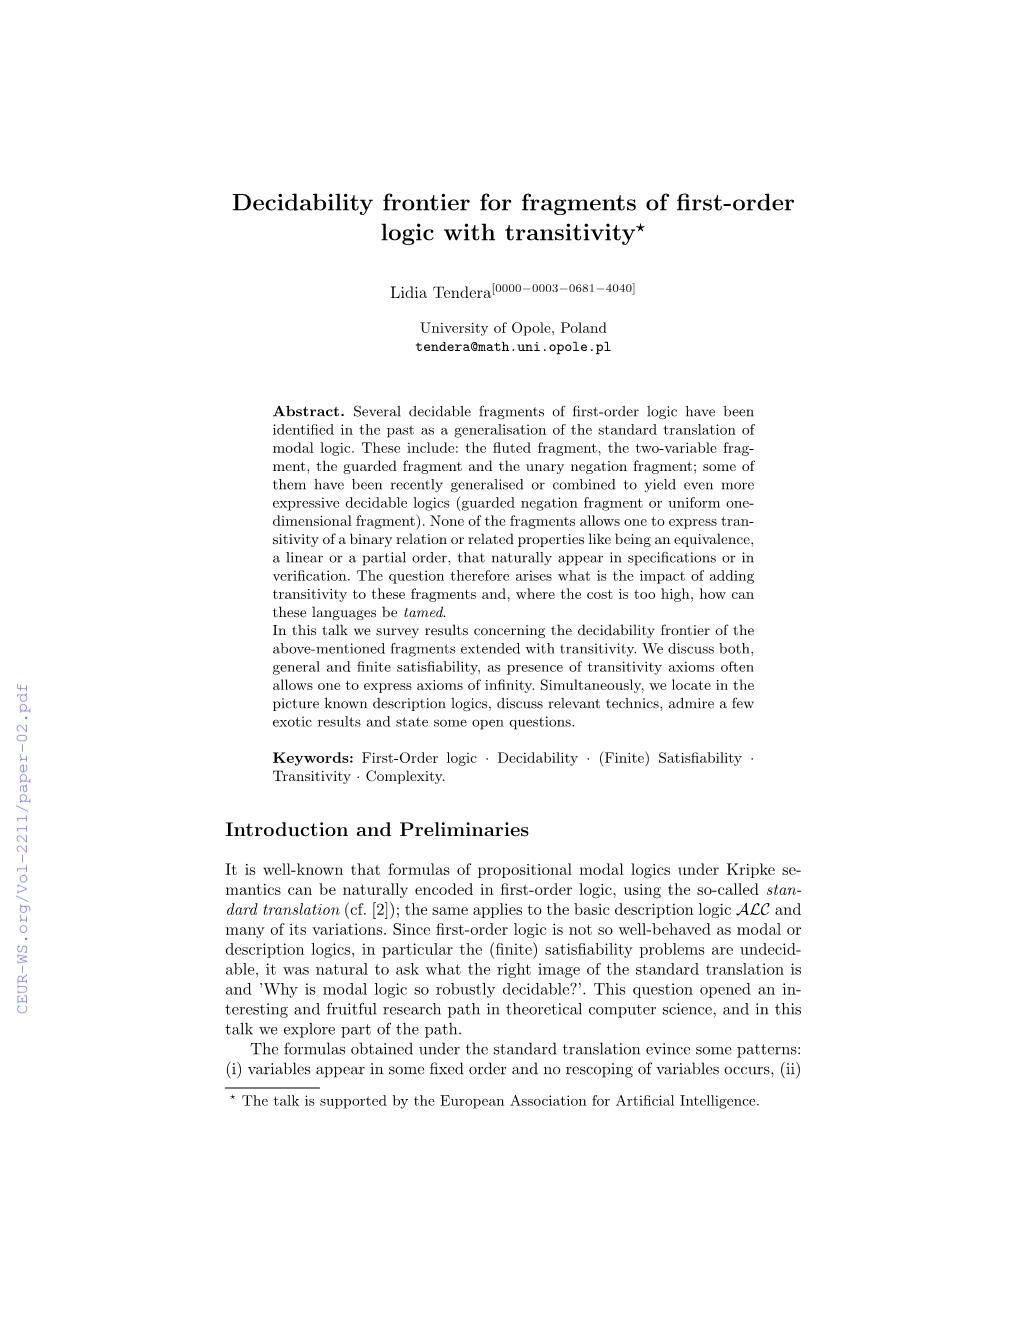 Decidability Frontier for Fragments of First-Order Logic with Transitivity⋆